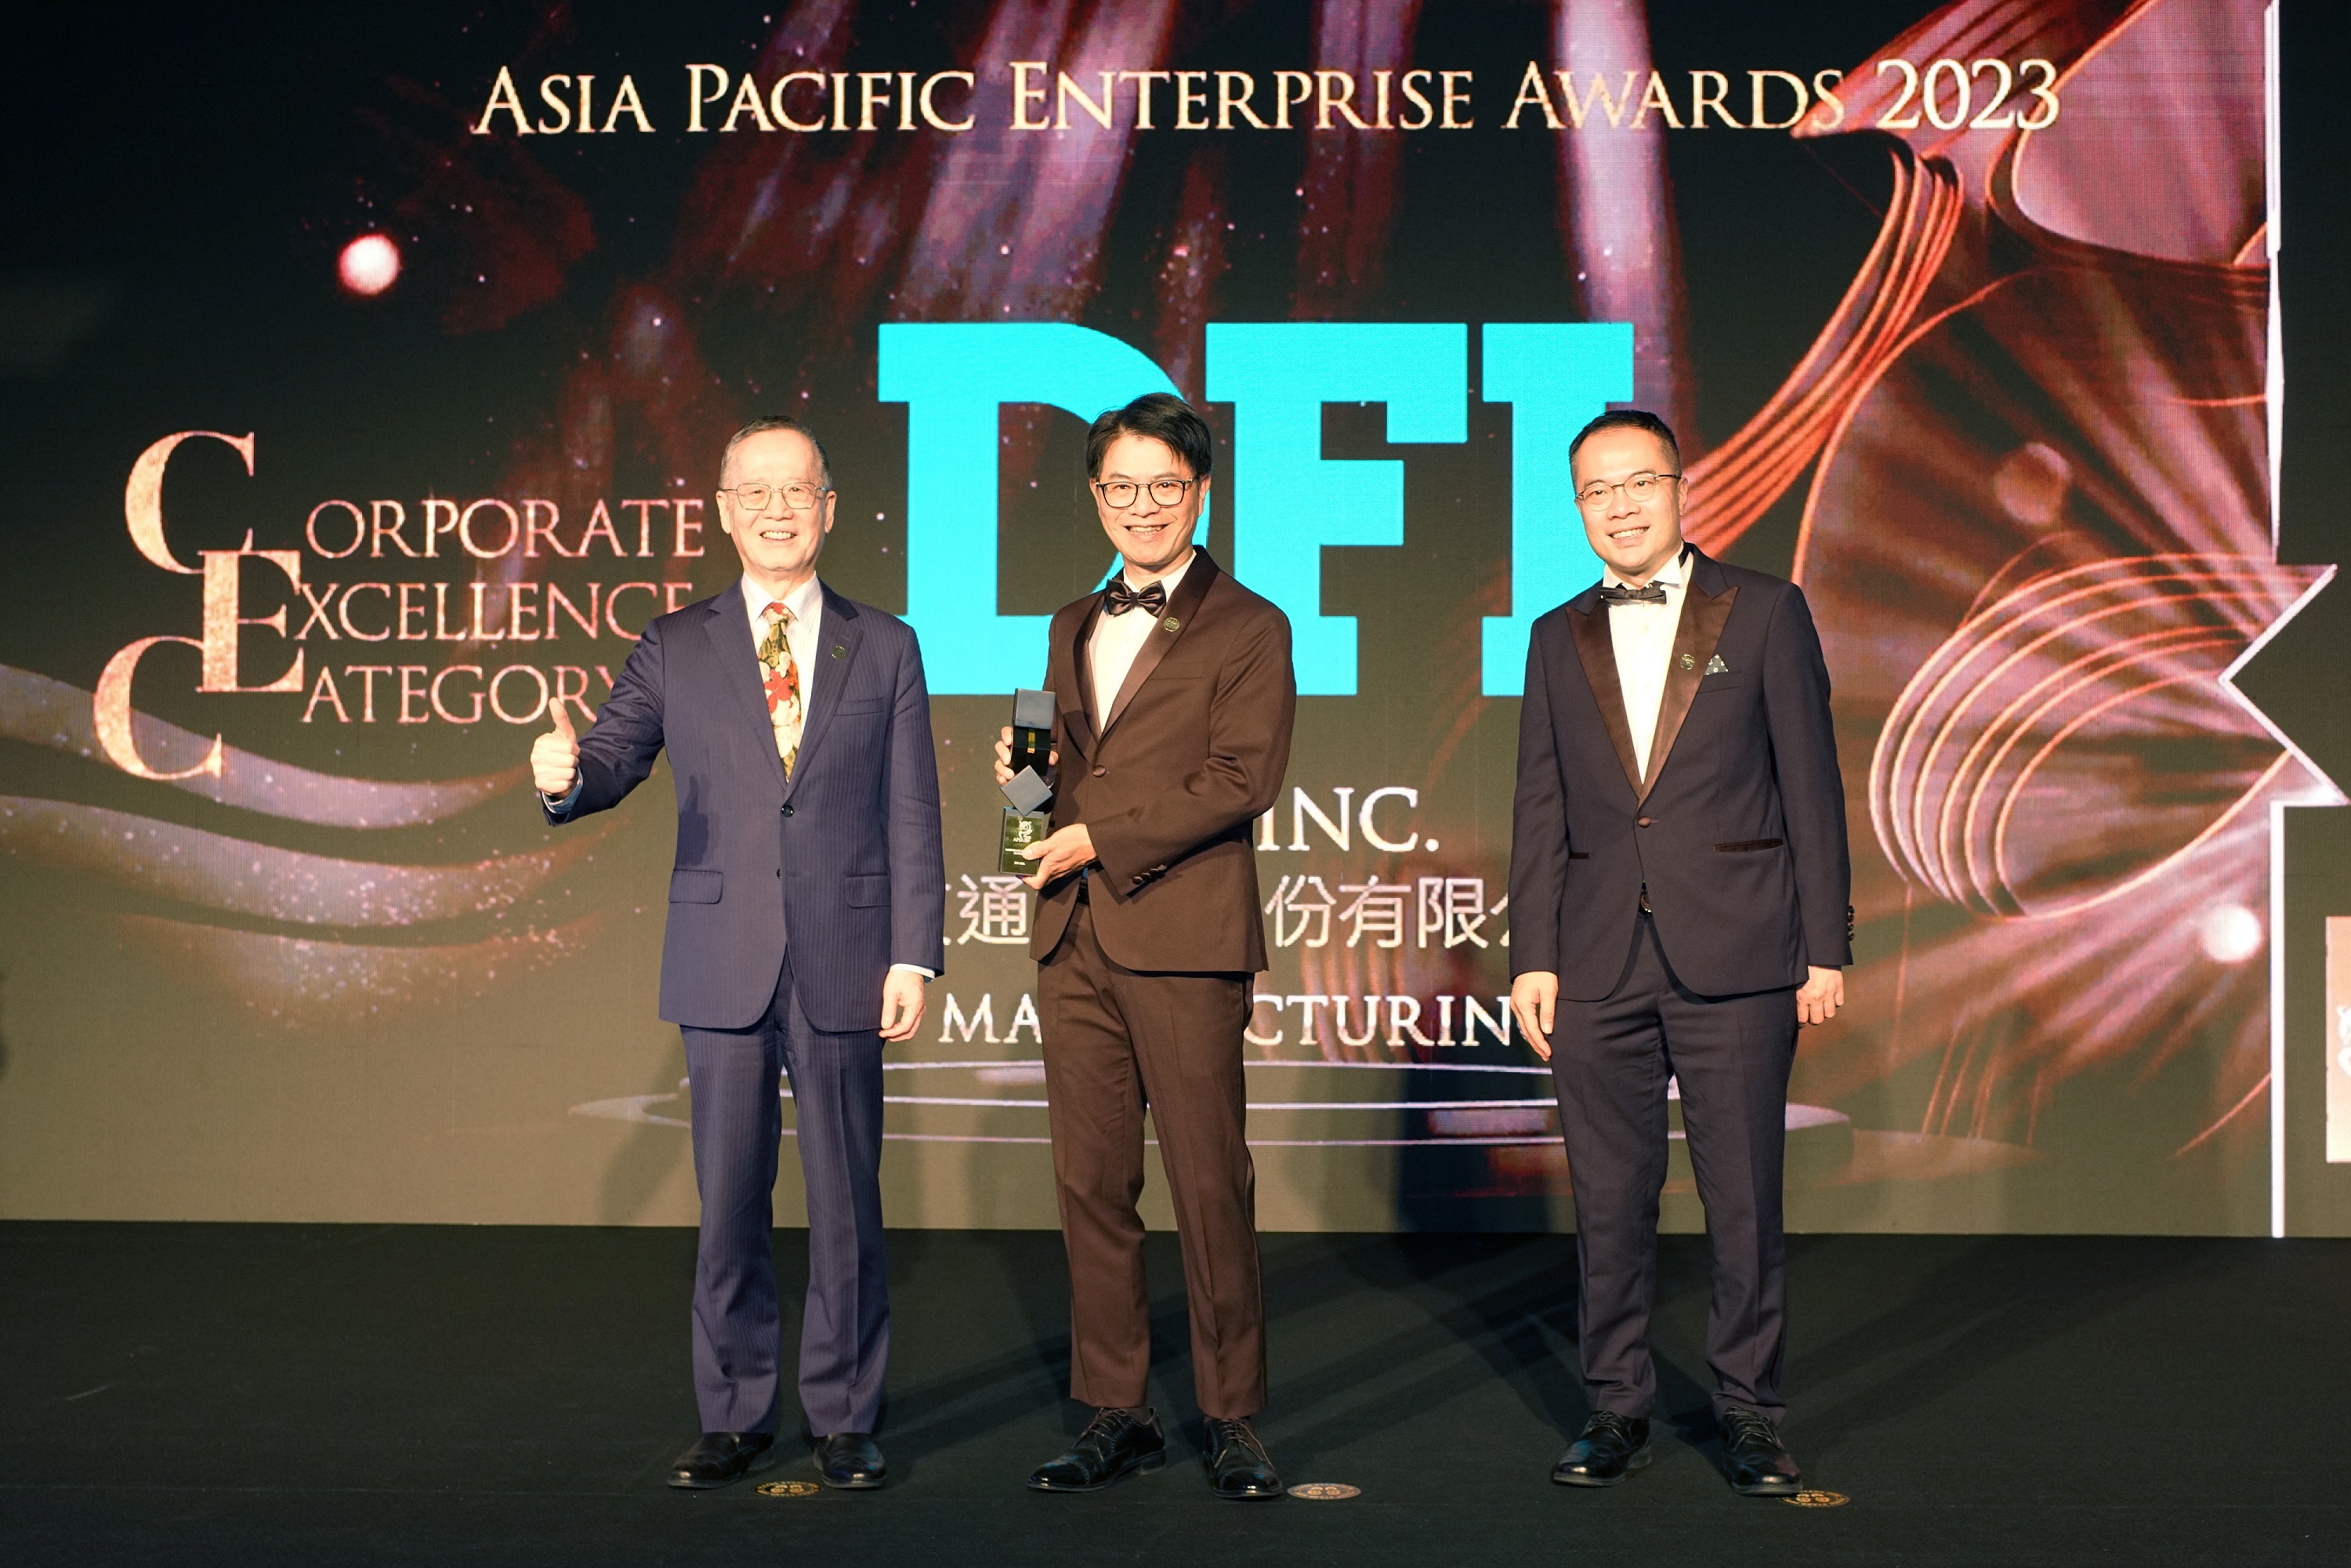 With its outstanding performance in aspects such as business operations and sustainable development, DFI stood out among 200 nominees to receive the Corporate Excellence Award. President Alexander Su received the award on behalf of the company.